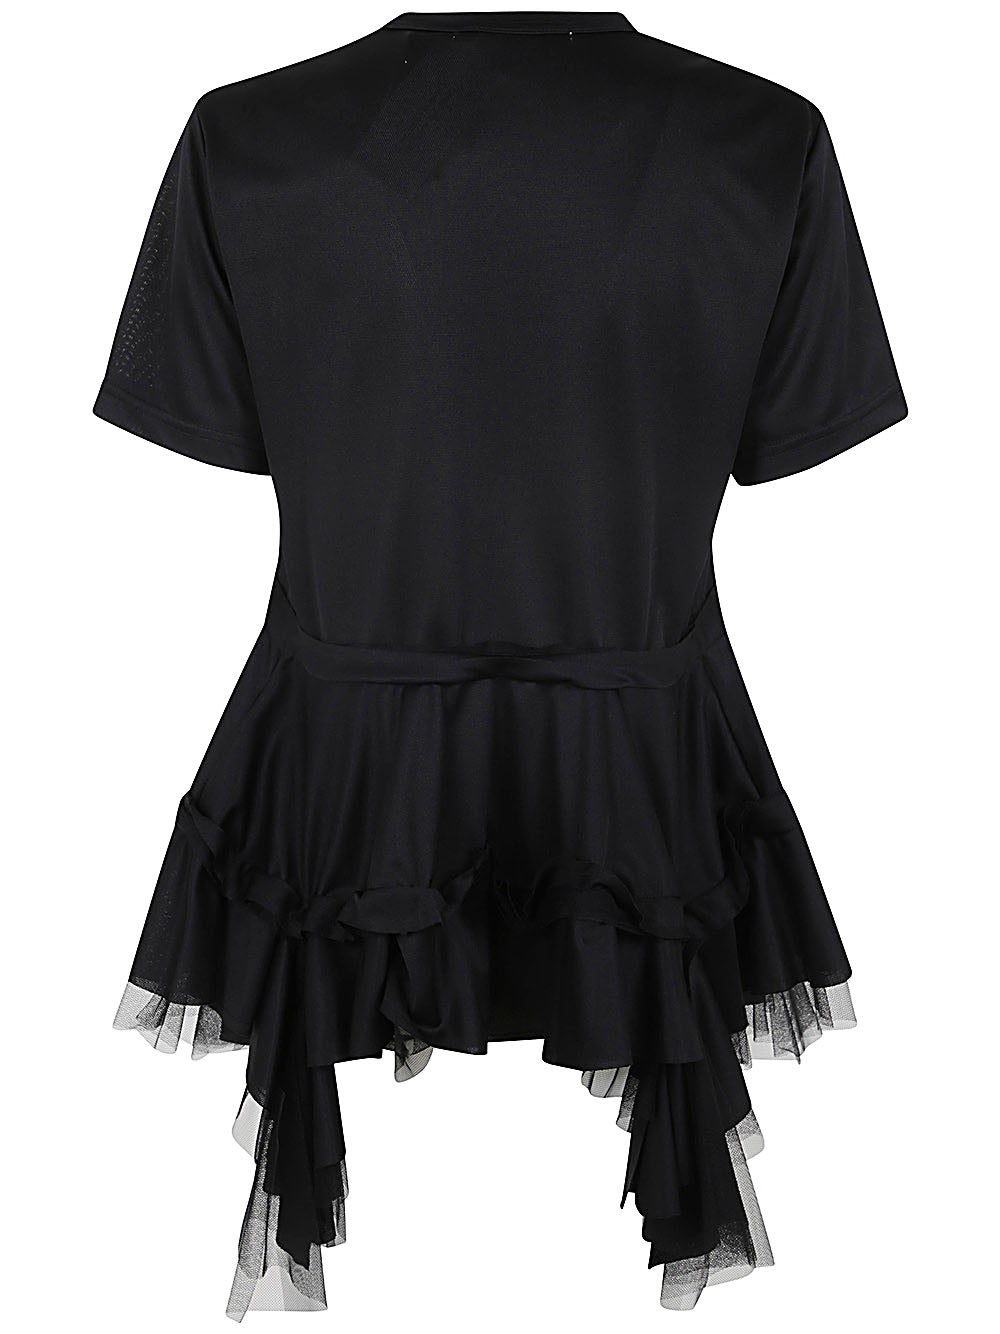 Tulle T-shirt